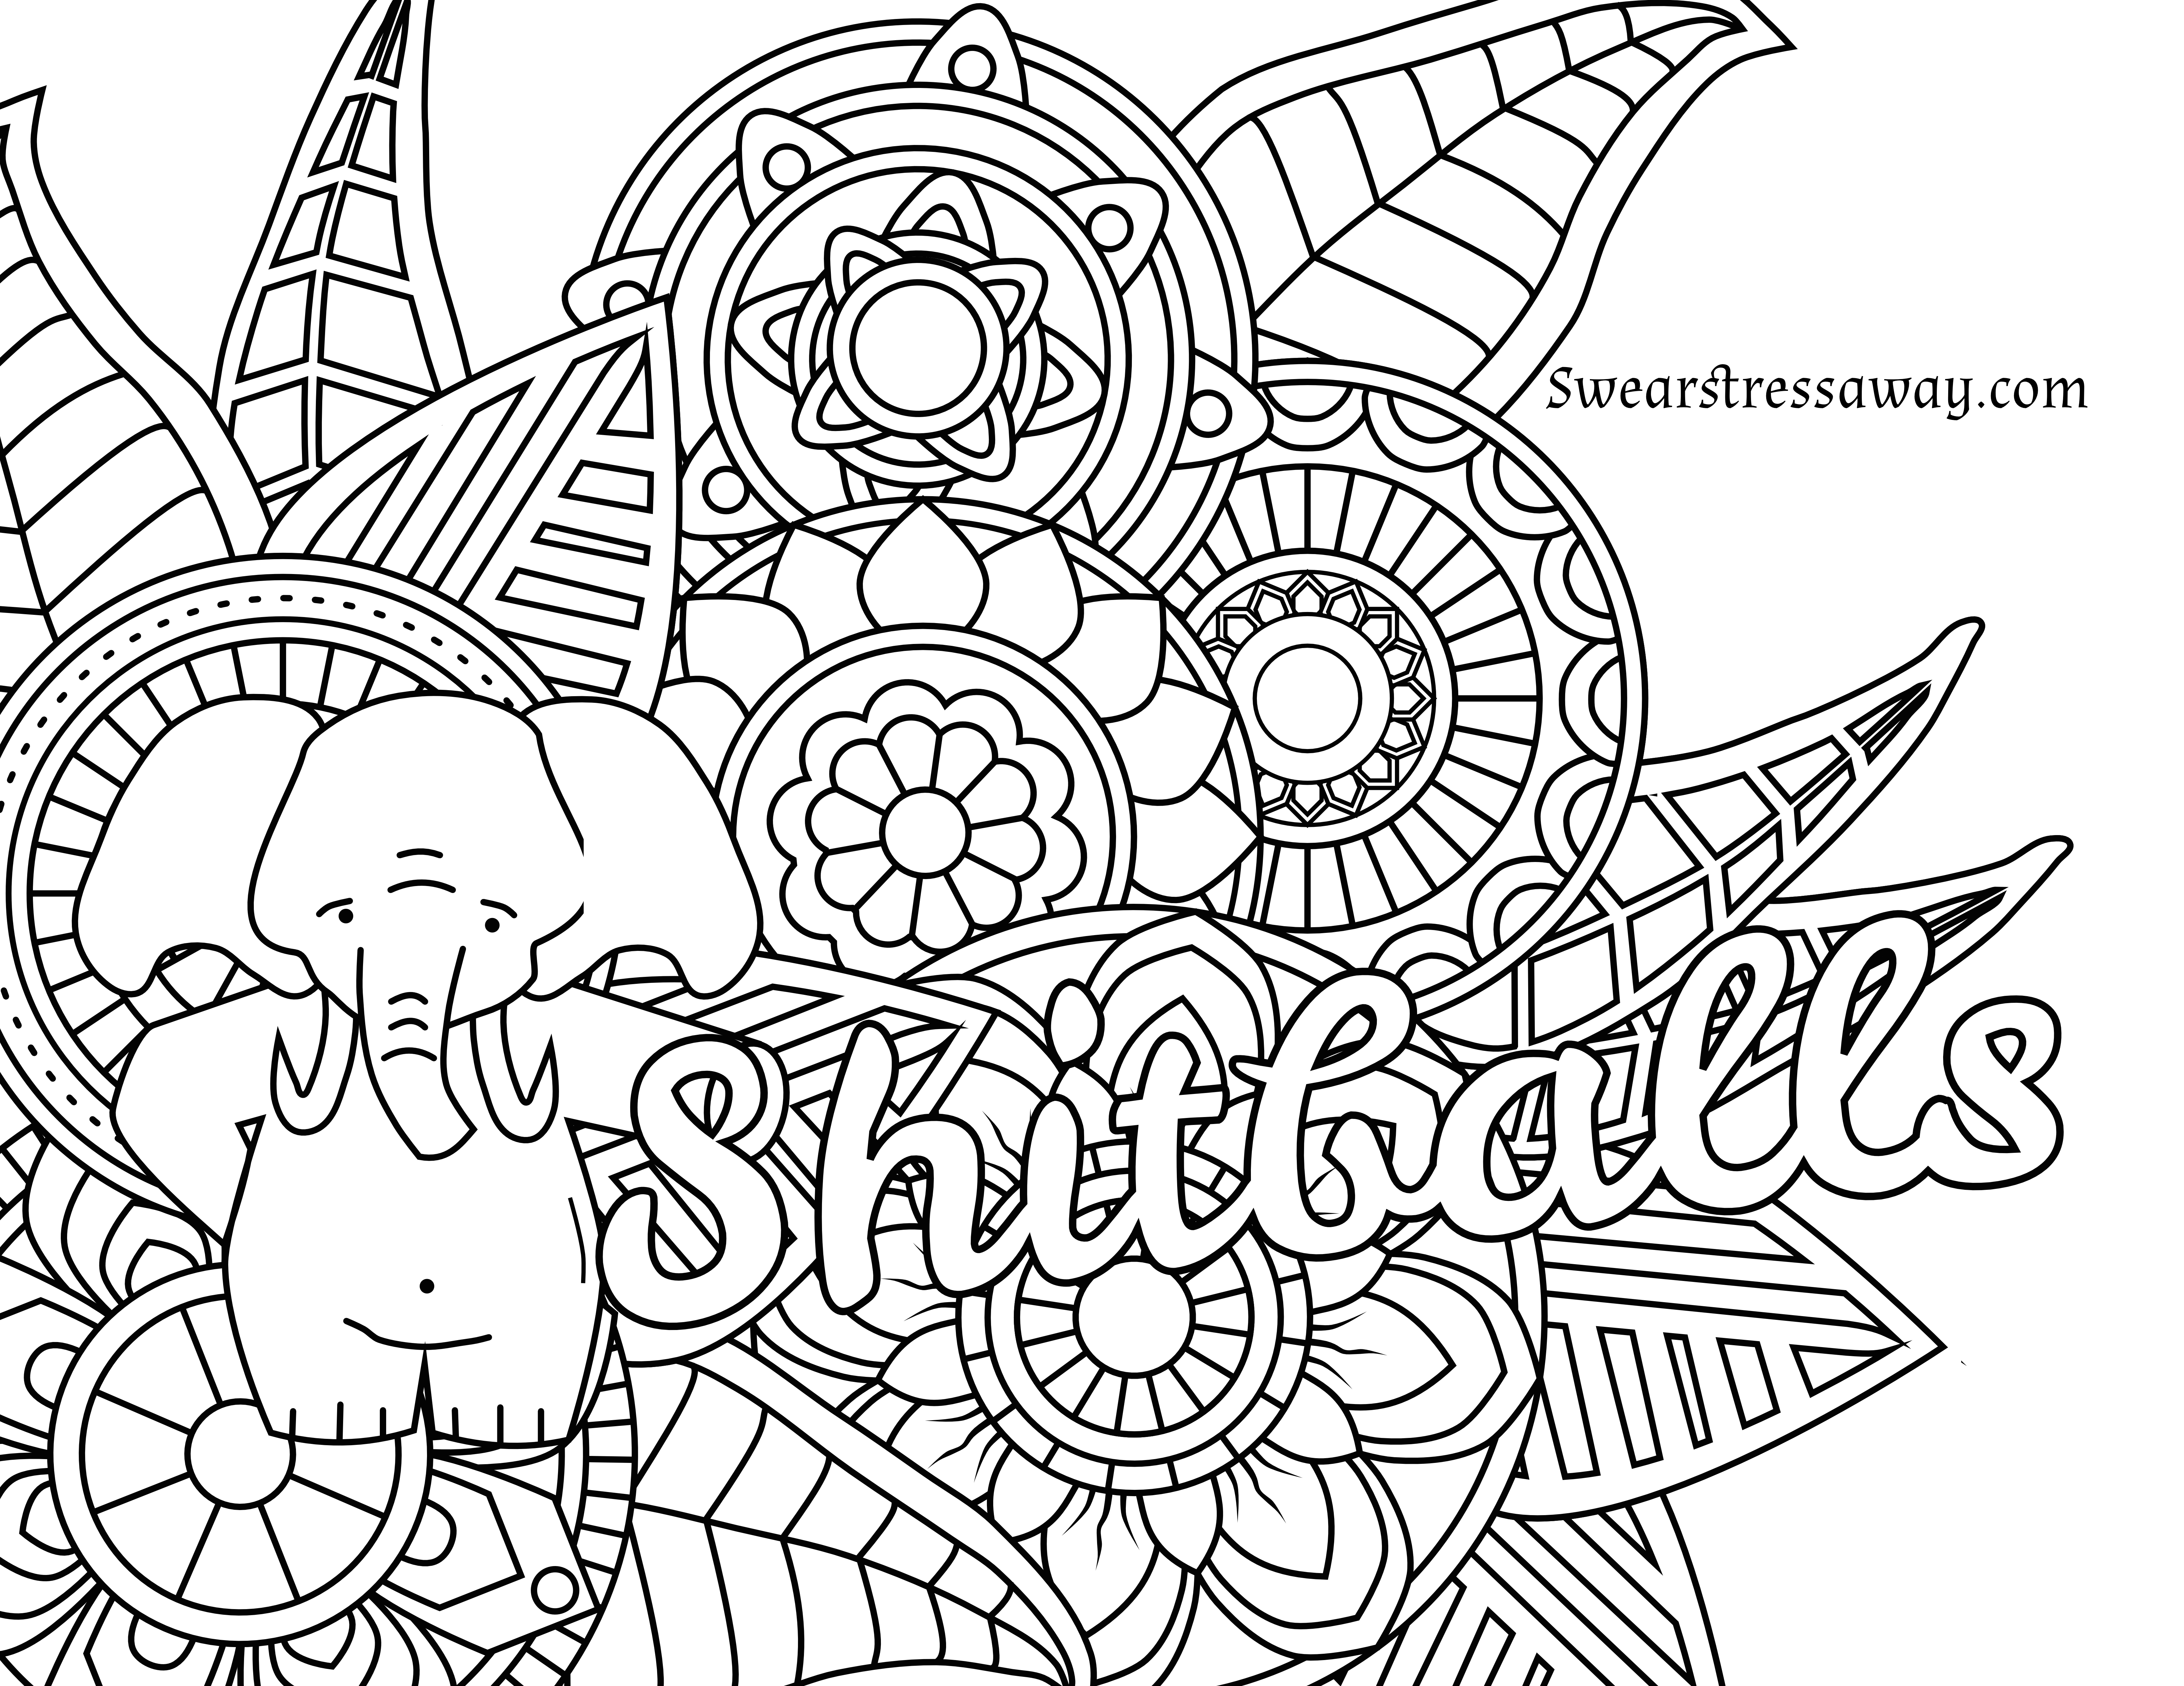 Coloring ~ Curse Word Coloring Pages Free Printable At Getdrawings - Free Printable Coloring Pages For Adults Swear Words